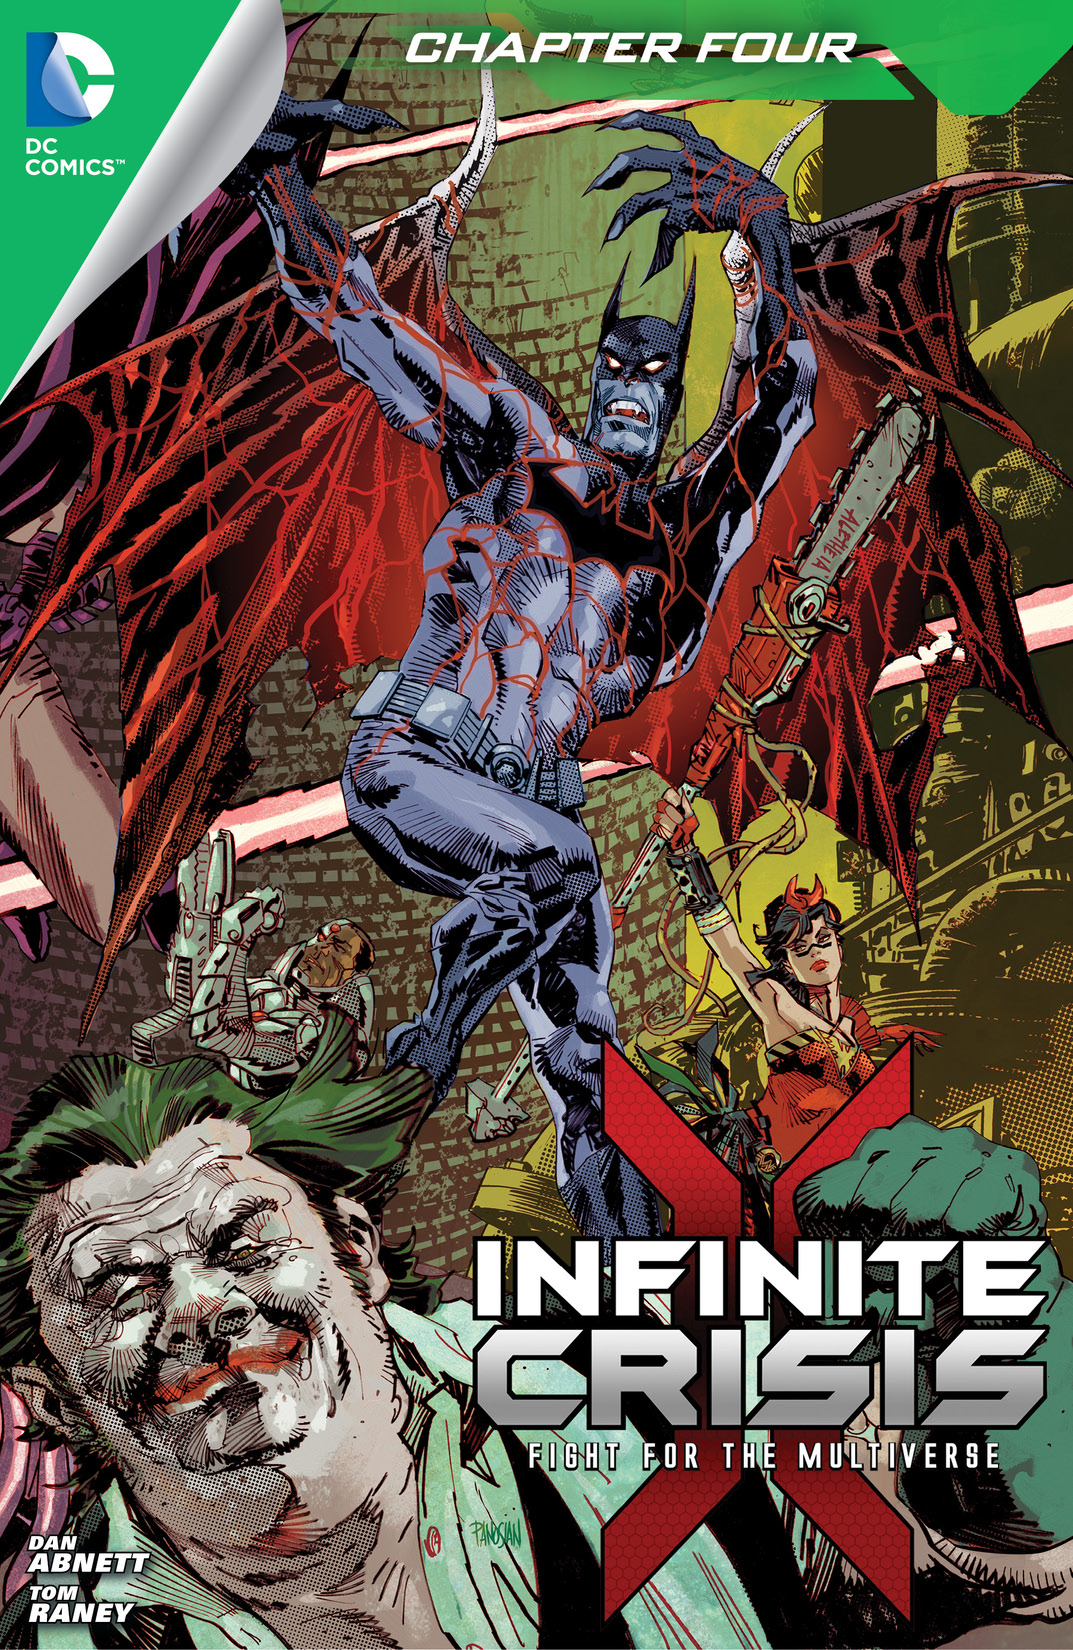 Infinite Crisis: Fight for the Multiverse #4 preview images